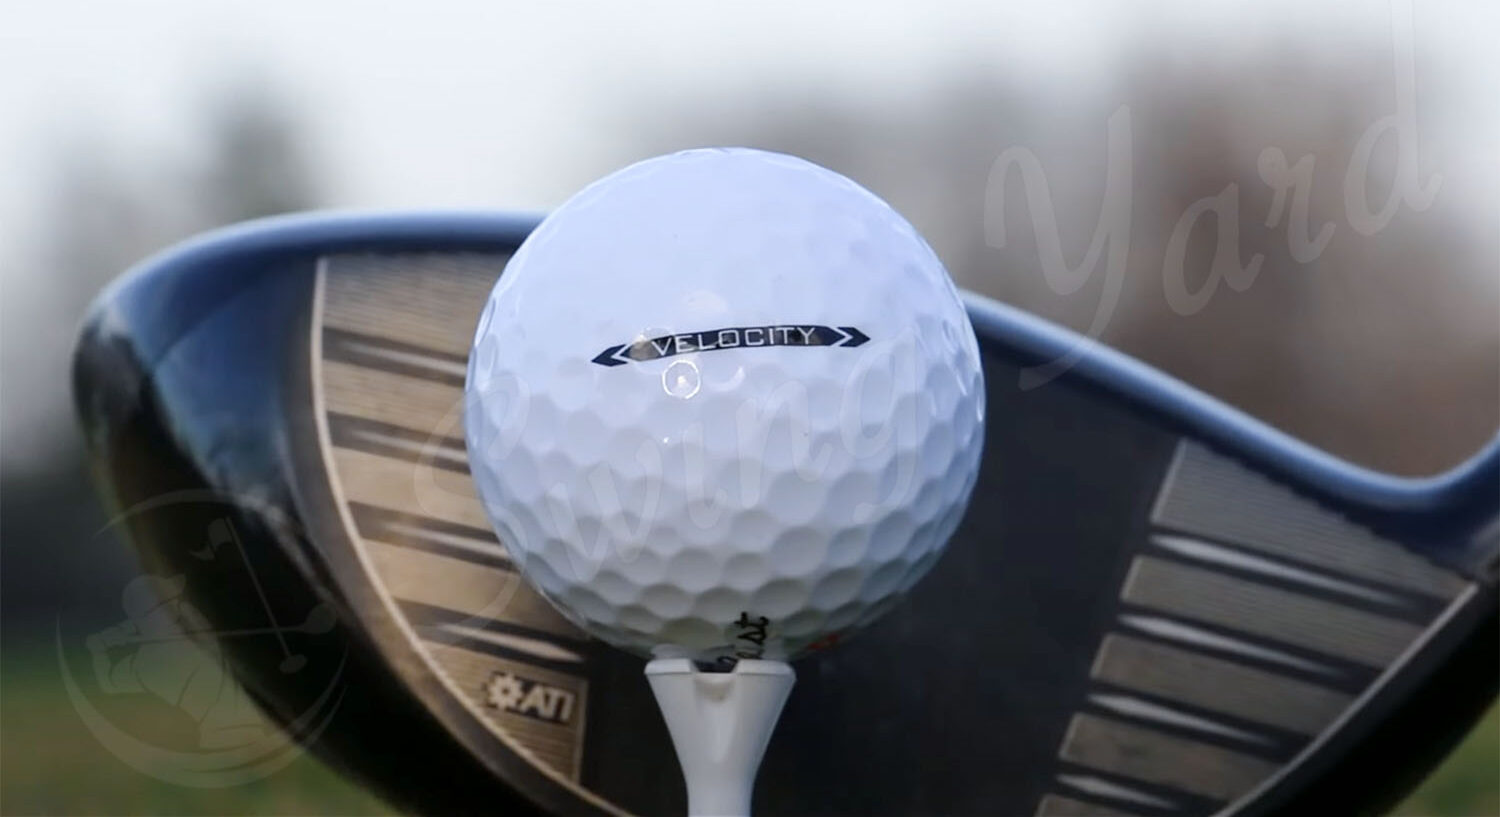 A close view of Titleist Velocity ball with golf tee and a driver